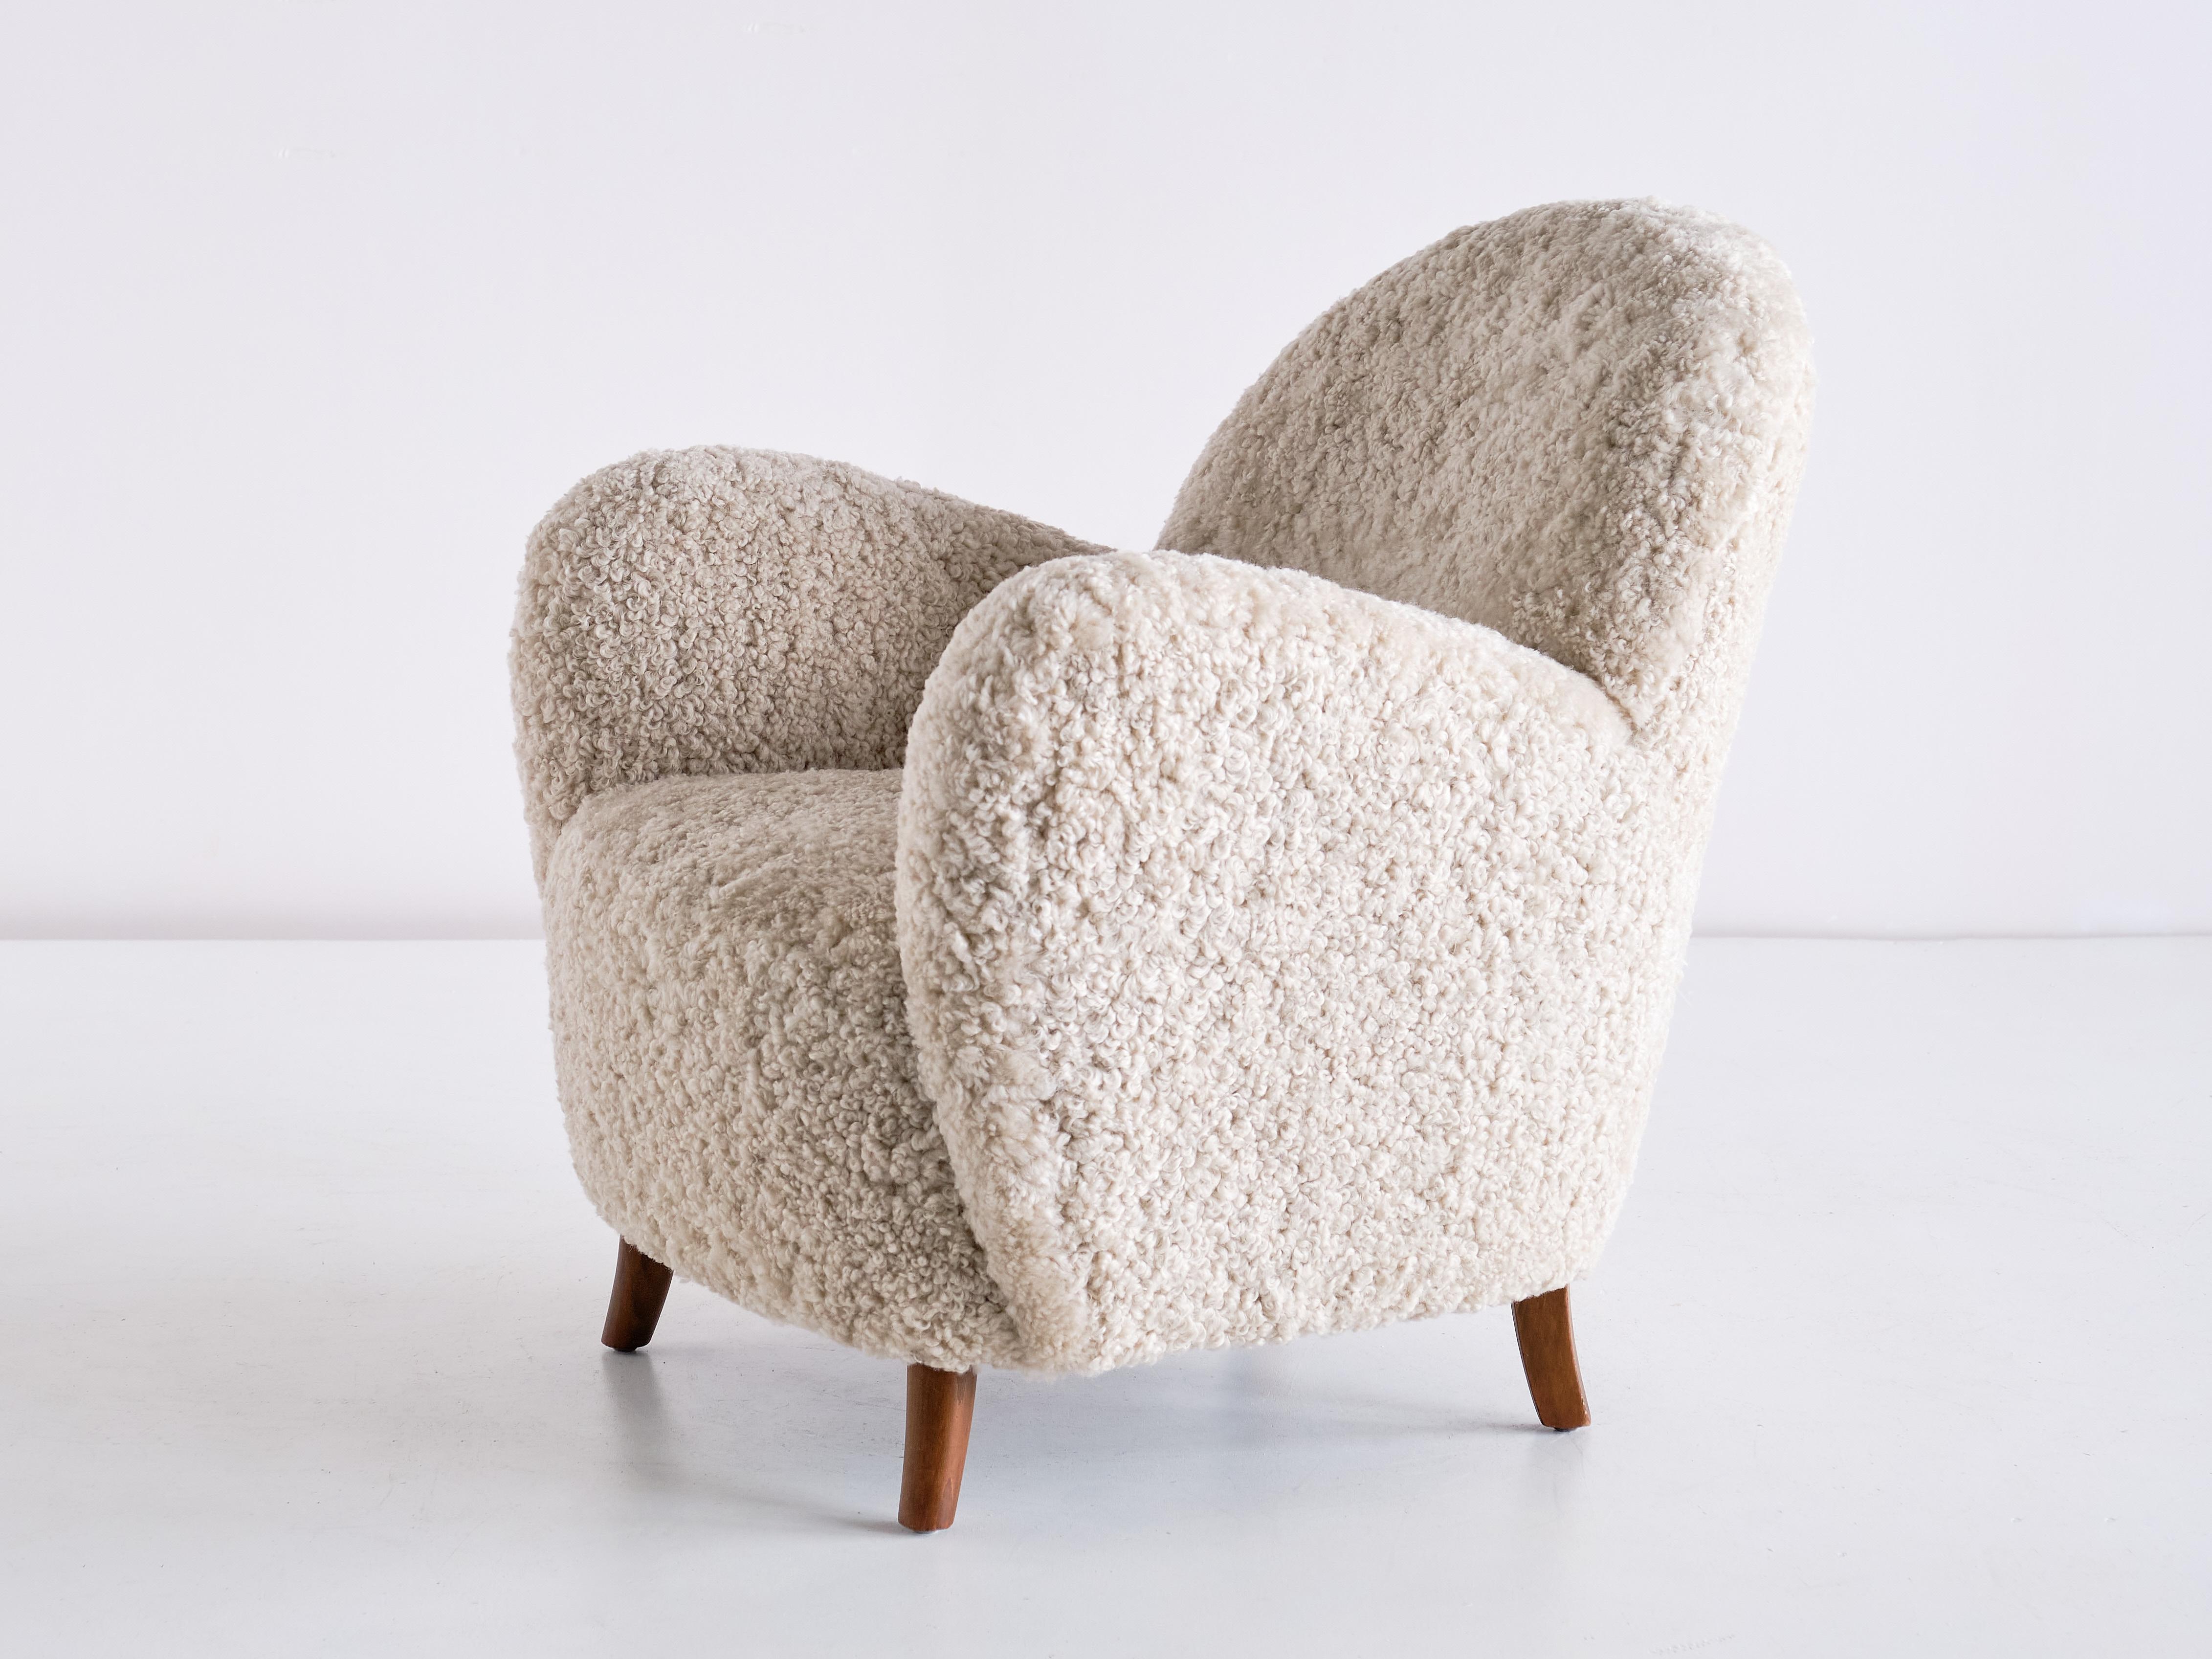 Pair of Thorald Madsen Armchairs in Sheepskin and Beech, Denmark, Mid 1930s For Sale 8